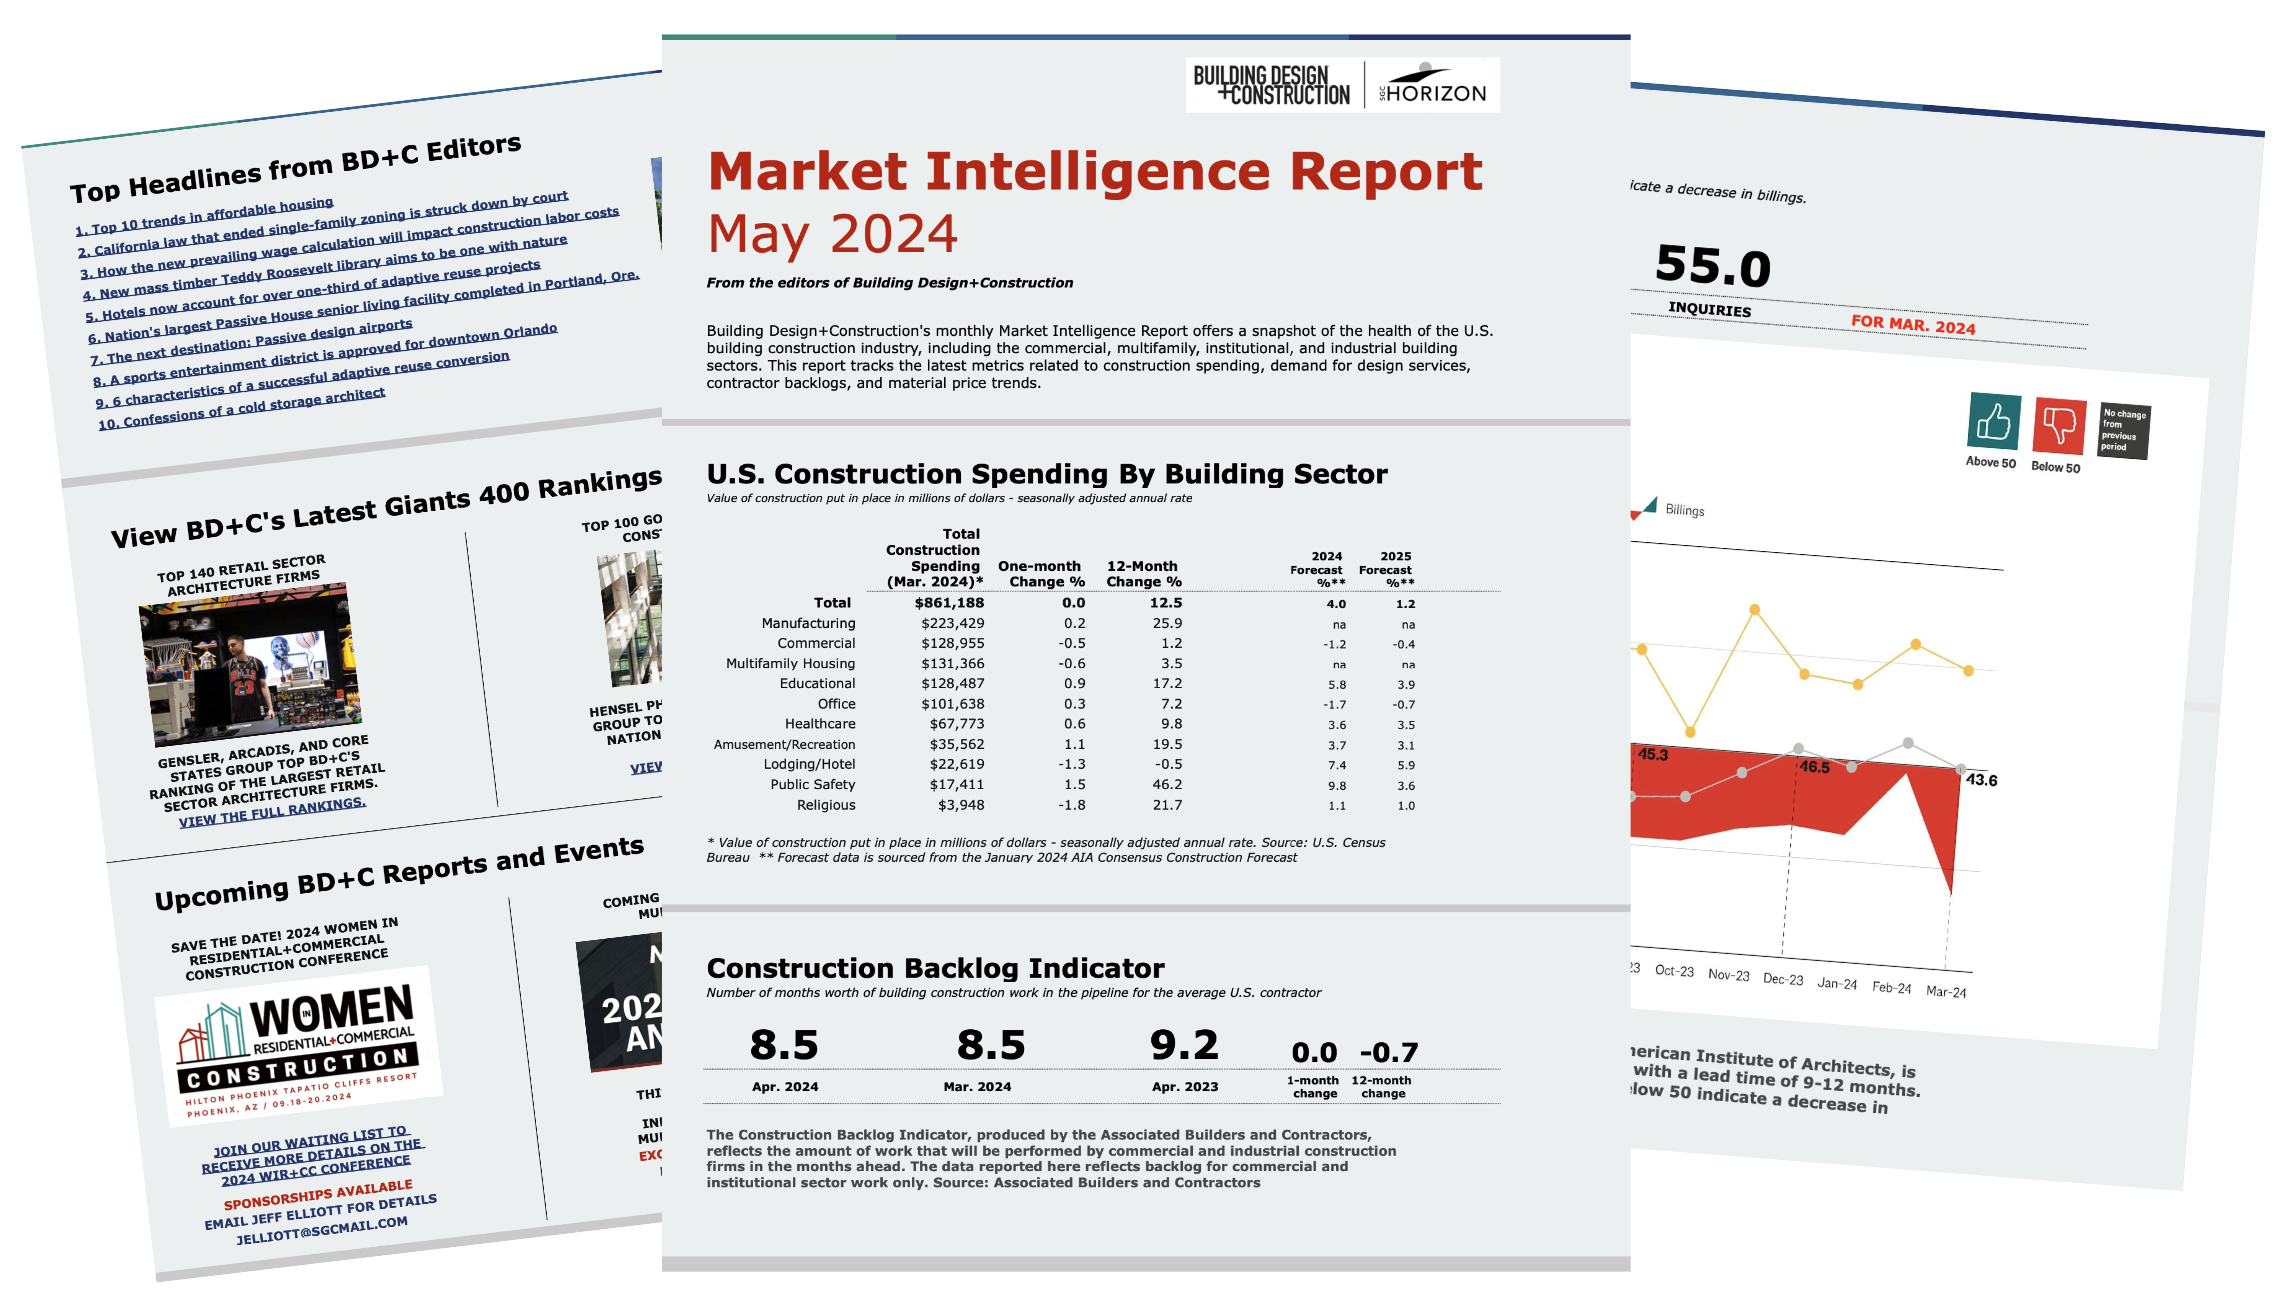 New download: BD+C's May 2024 Market Intelligence Report